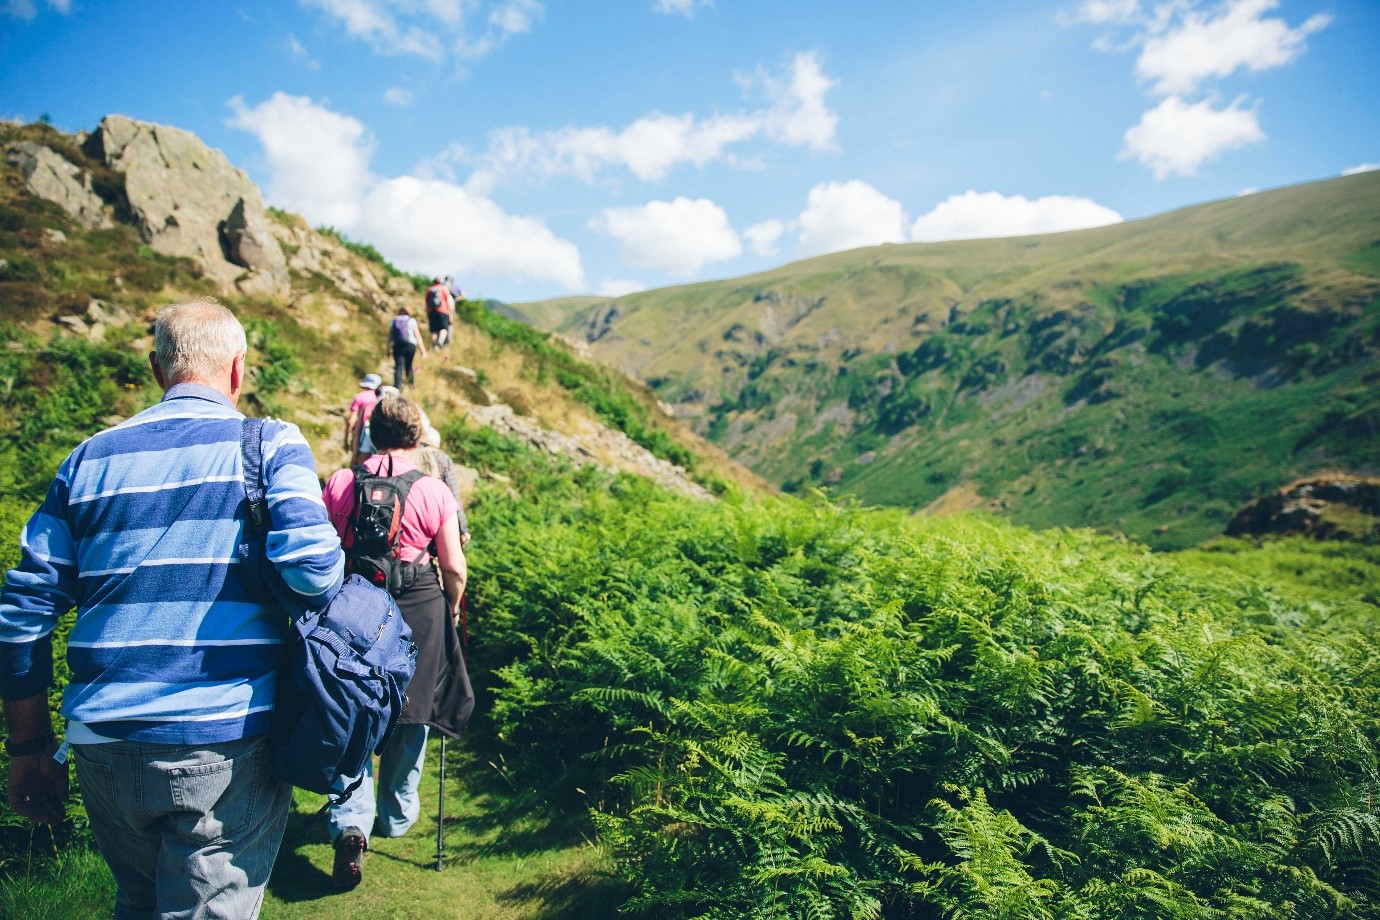 Lake District guided walks